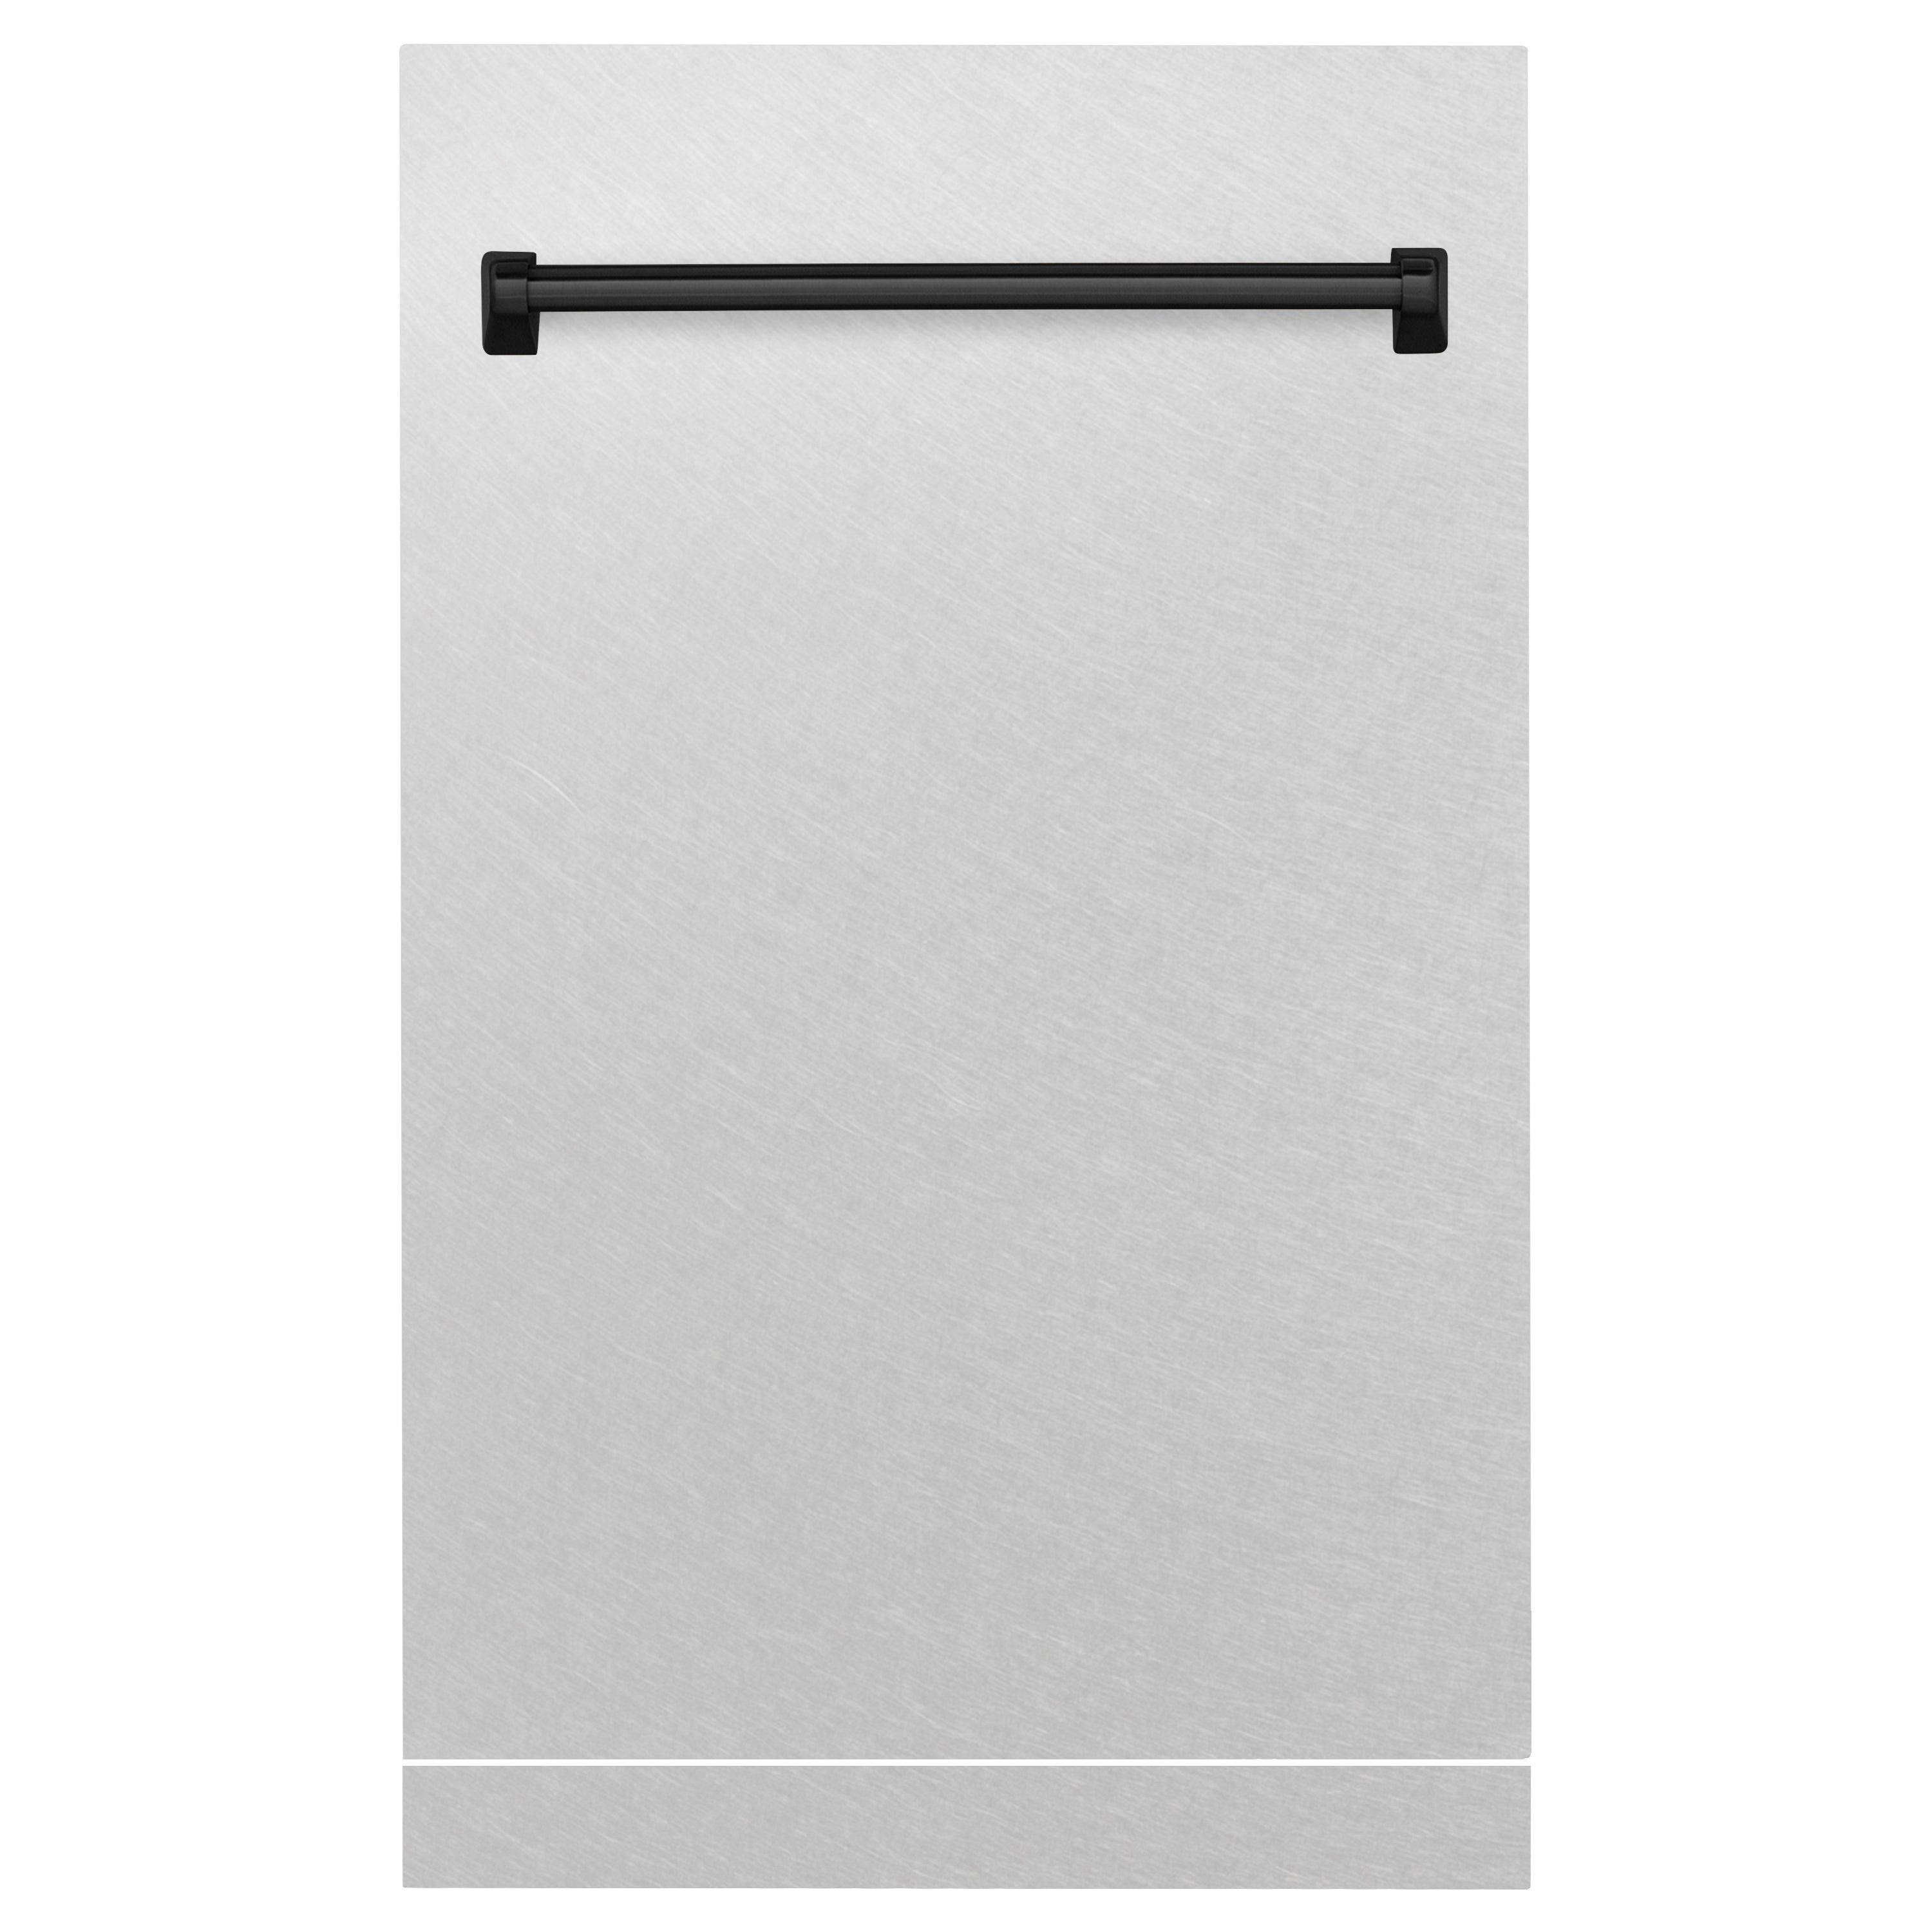 ZLINE 18" Autograph Edition Tallac Dishwasher Panel in Fingerprint Resistant Stainless Steel with Matte Black Handle (DPVZ-SN-18-MB)